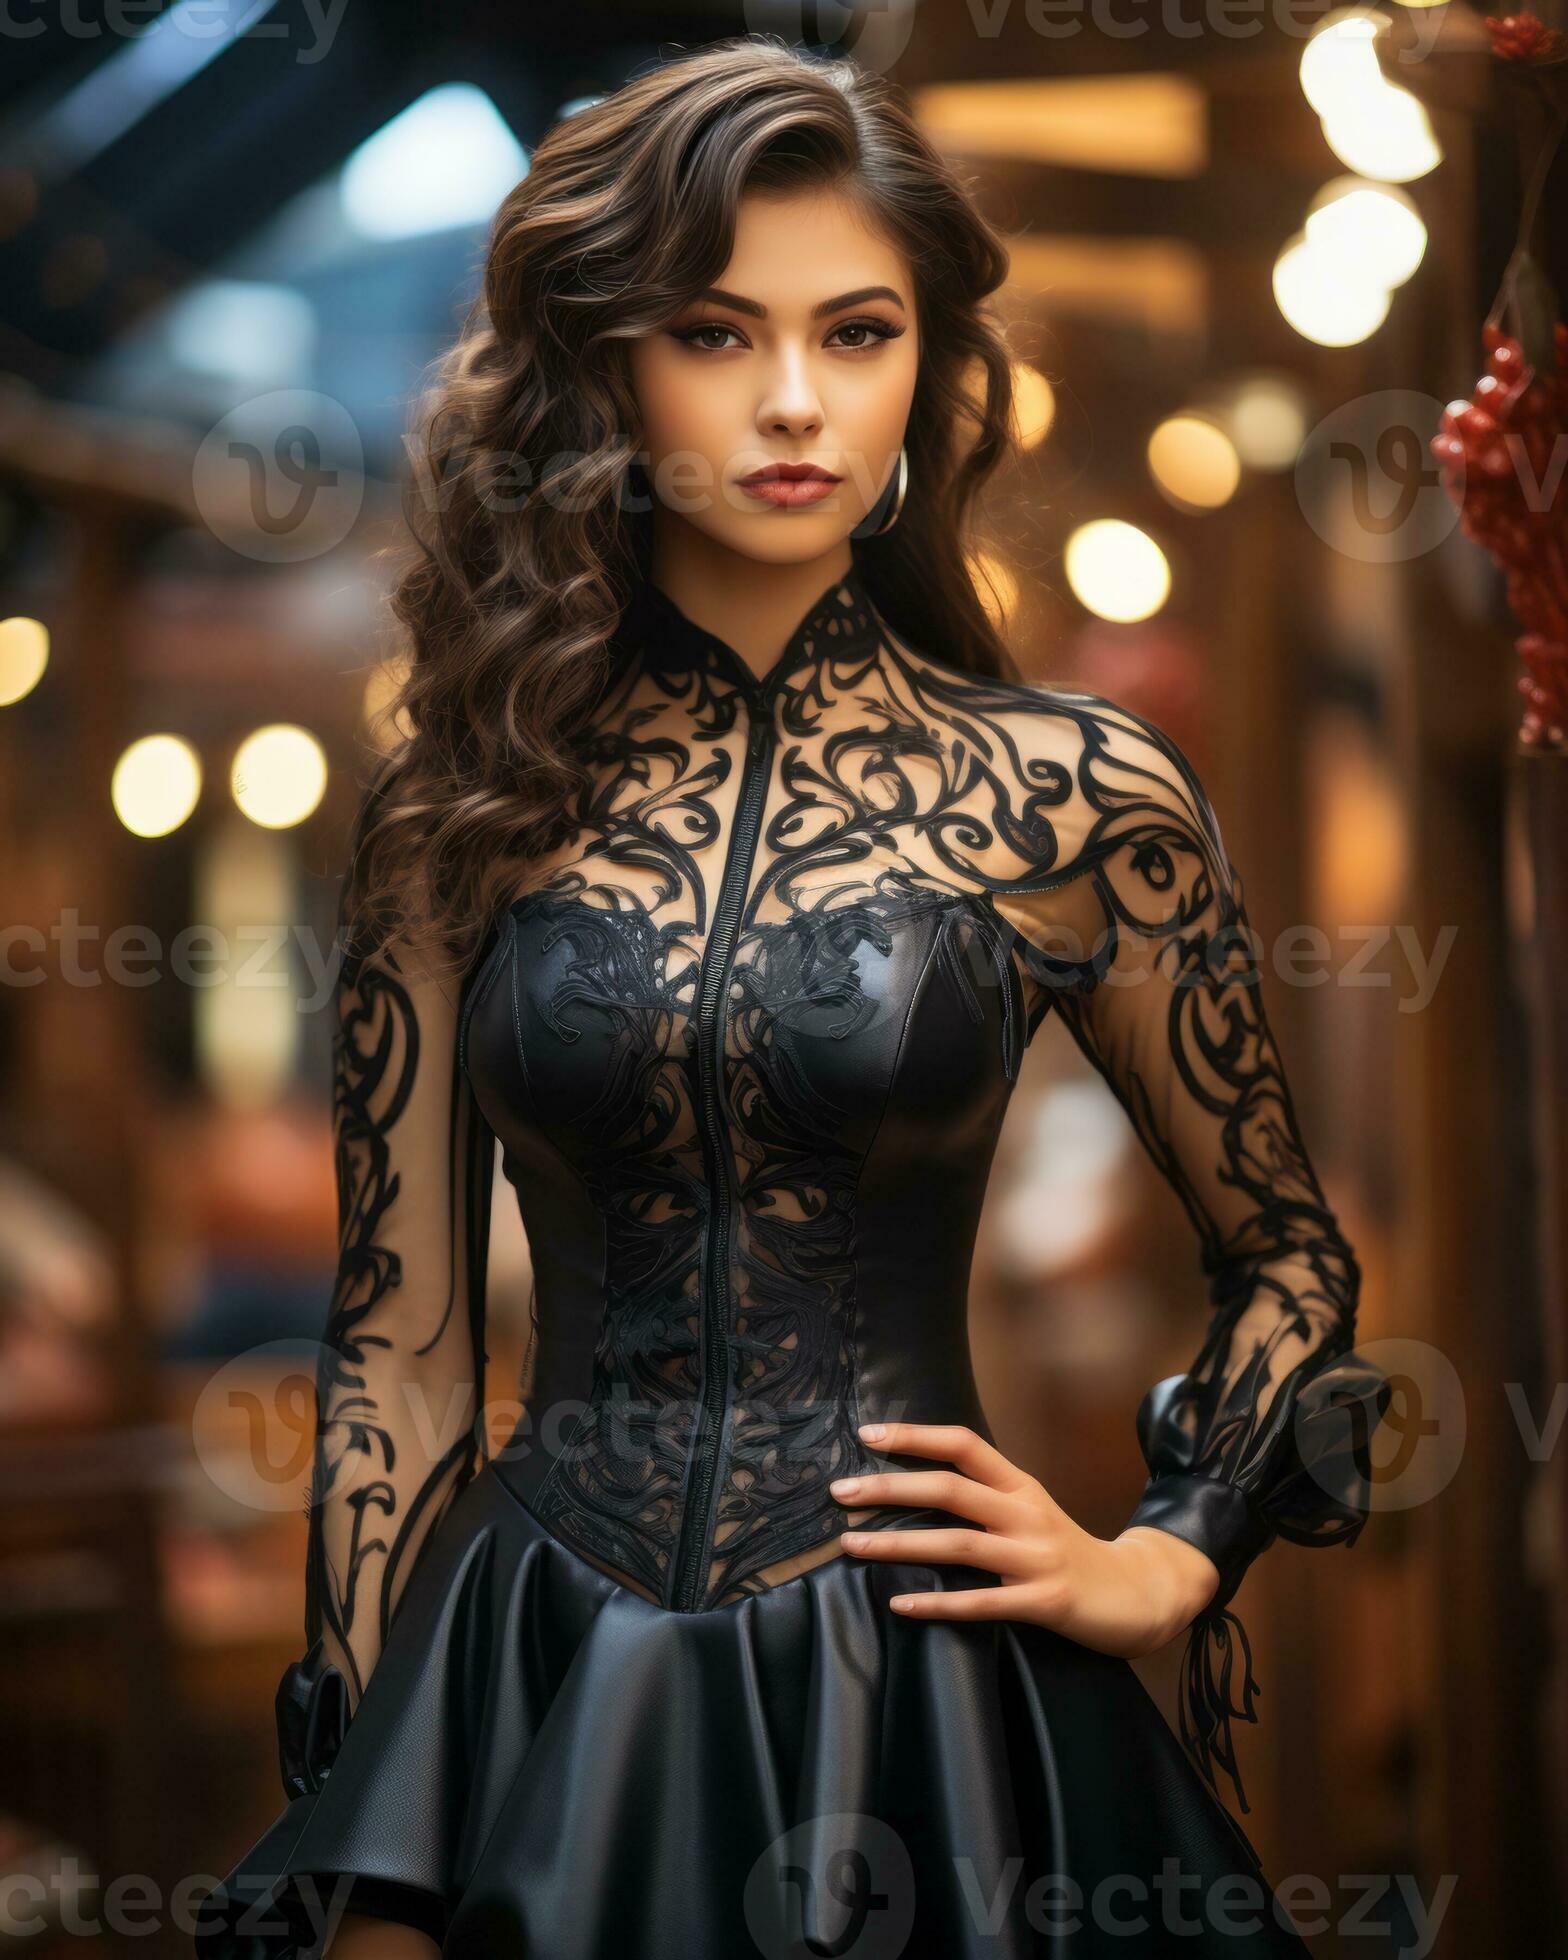 https://static.vecteezy.com/system/resources/previews/031/574/279/large_2x/a-gothic-lady-adorned-in-a-stunning-black-dress-and-corset-exudes-fierce-fashion-as-she-poses-indoors-like-a-model-captivating-all-with-her-striking-presence-ai-generative-photo.jpeg